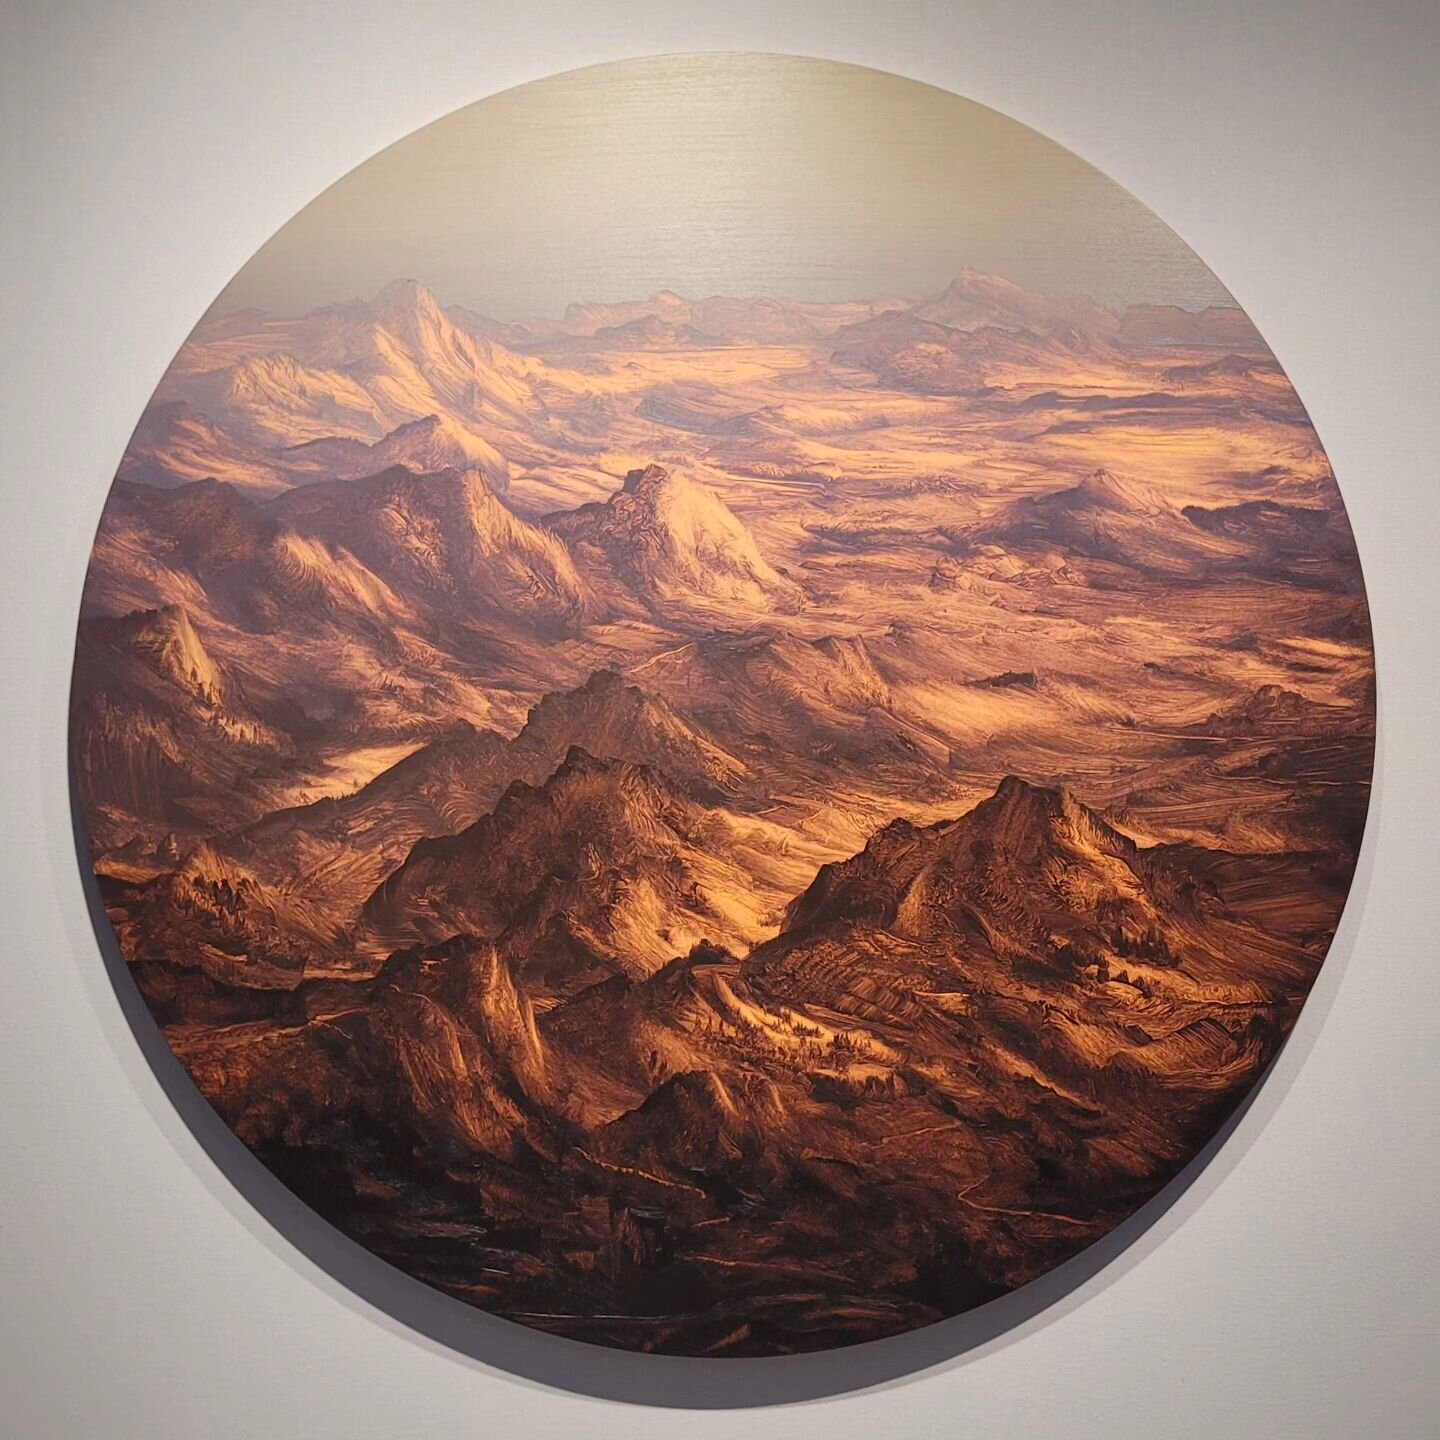 The 'Vistas' are imaginary views constructed with color gradients, usually from light to dark, and contribute to the illusion of a vast landscape. In this series, Stefan Peters has exchanged the canvas for wooden panels, which have been smoothed into